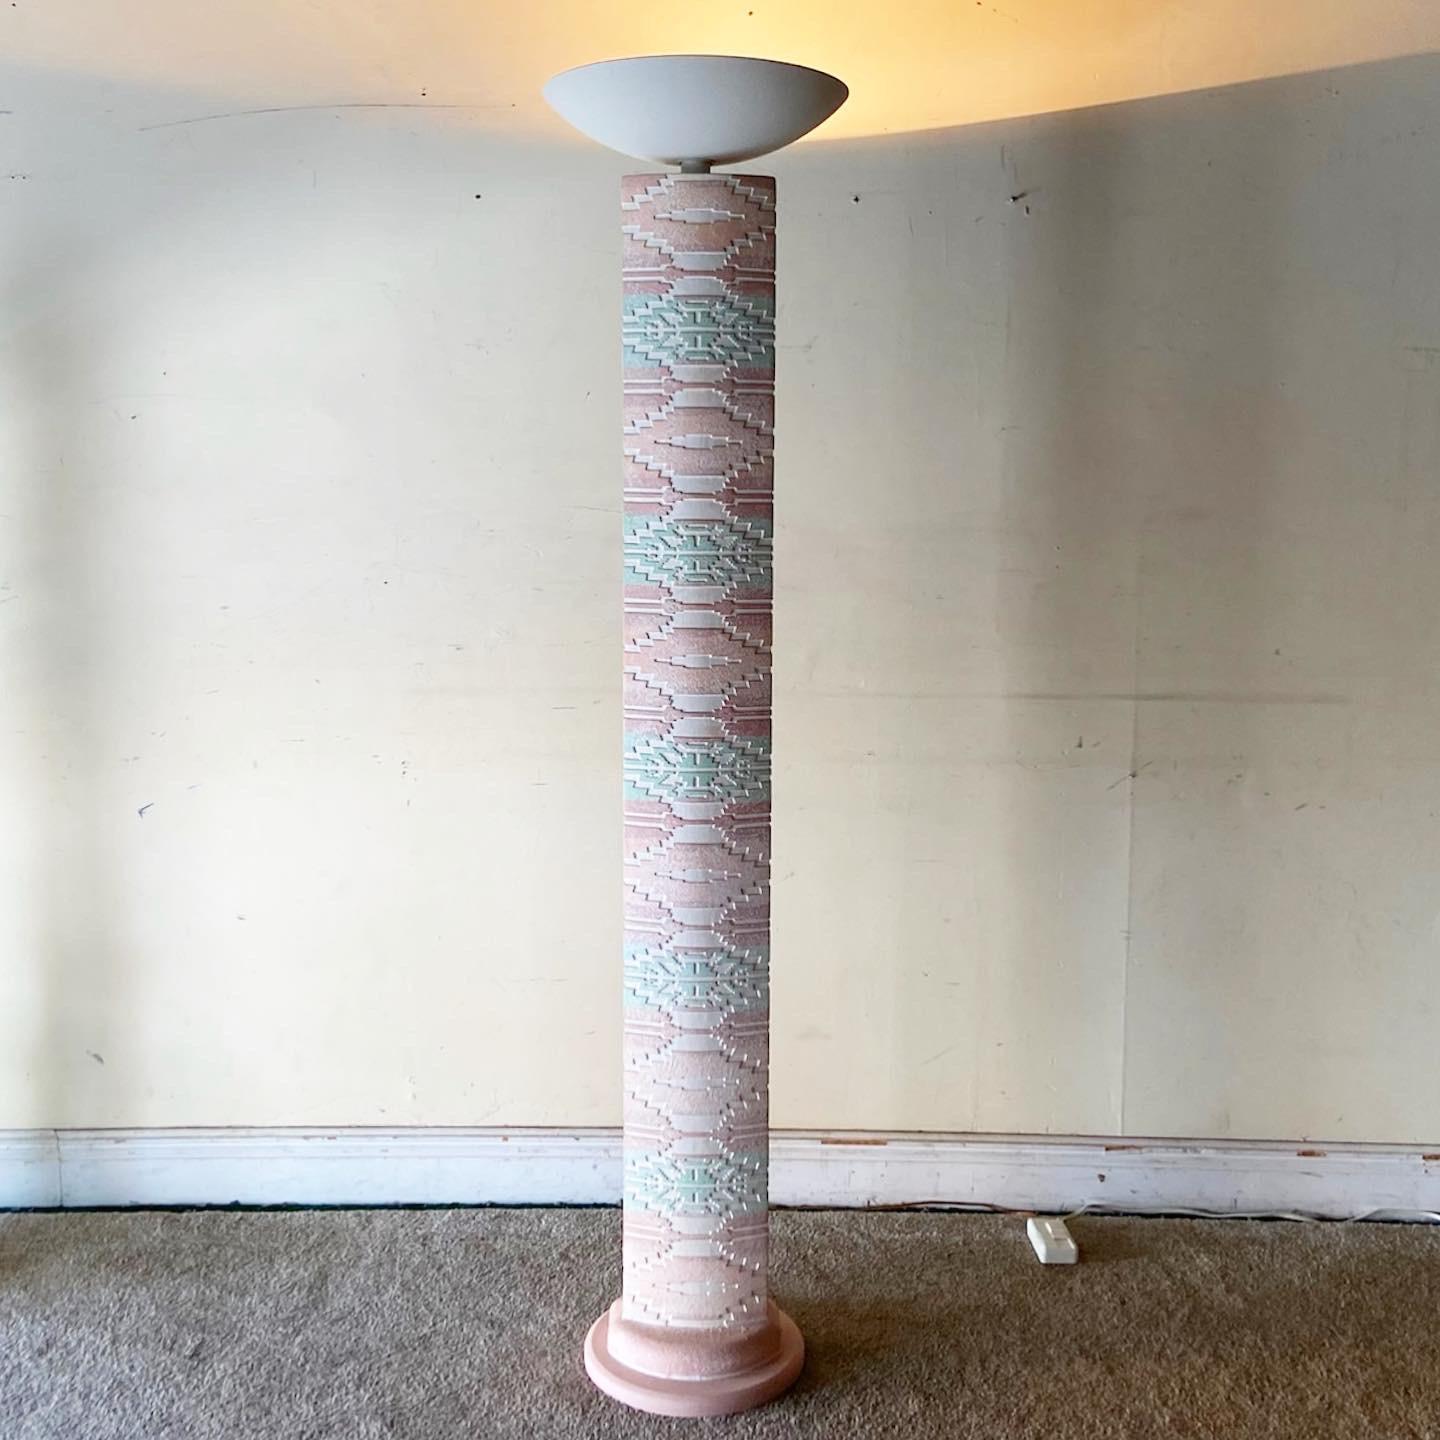 Exceptional postmodern southwest style plaster floor lamp. Features a sculpted totem pole design with a pink, white and green finish.
  